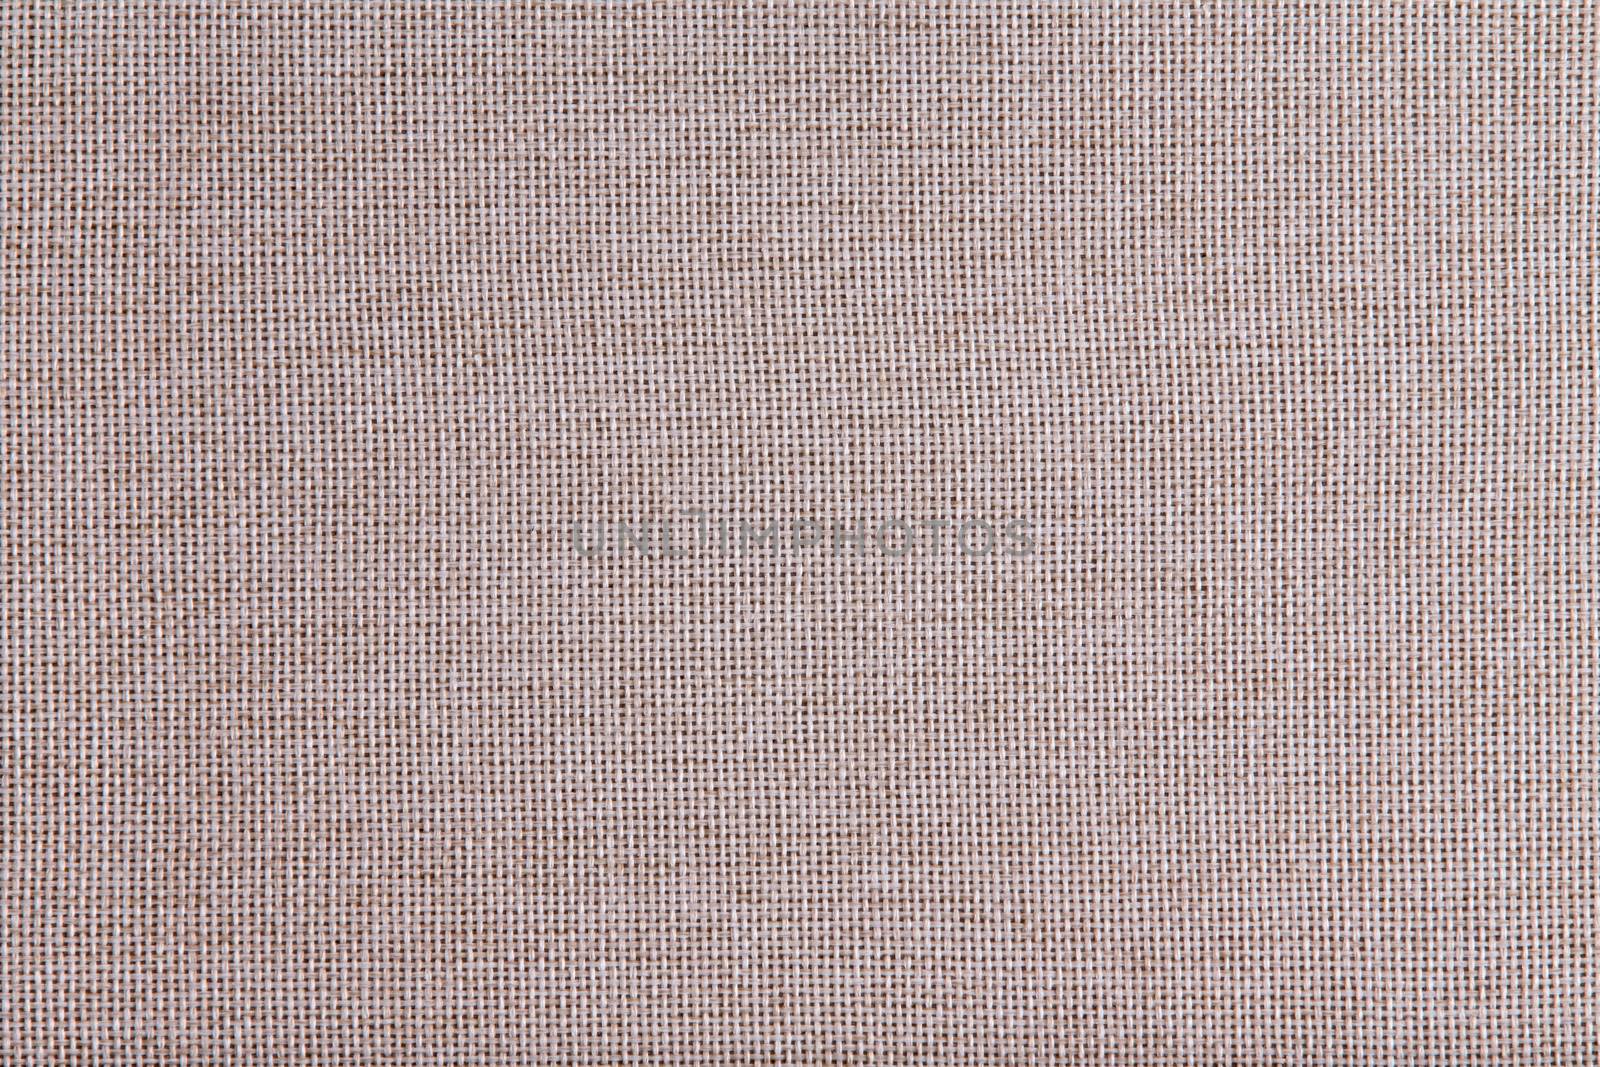 Background texture of coarse woven beige cloth by coskun